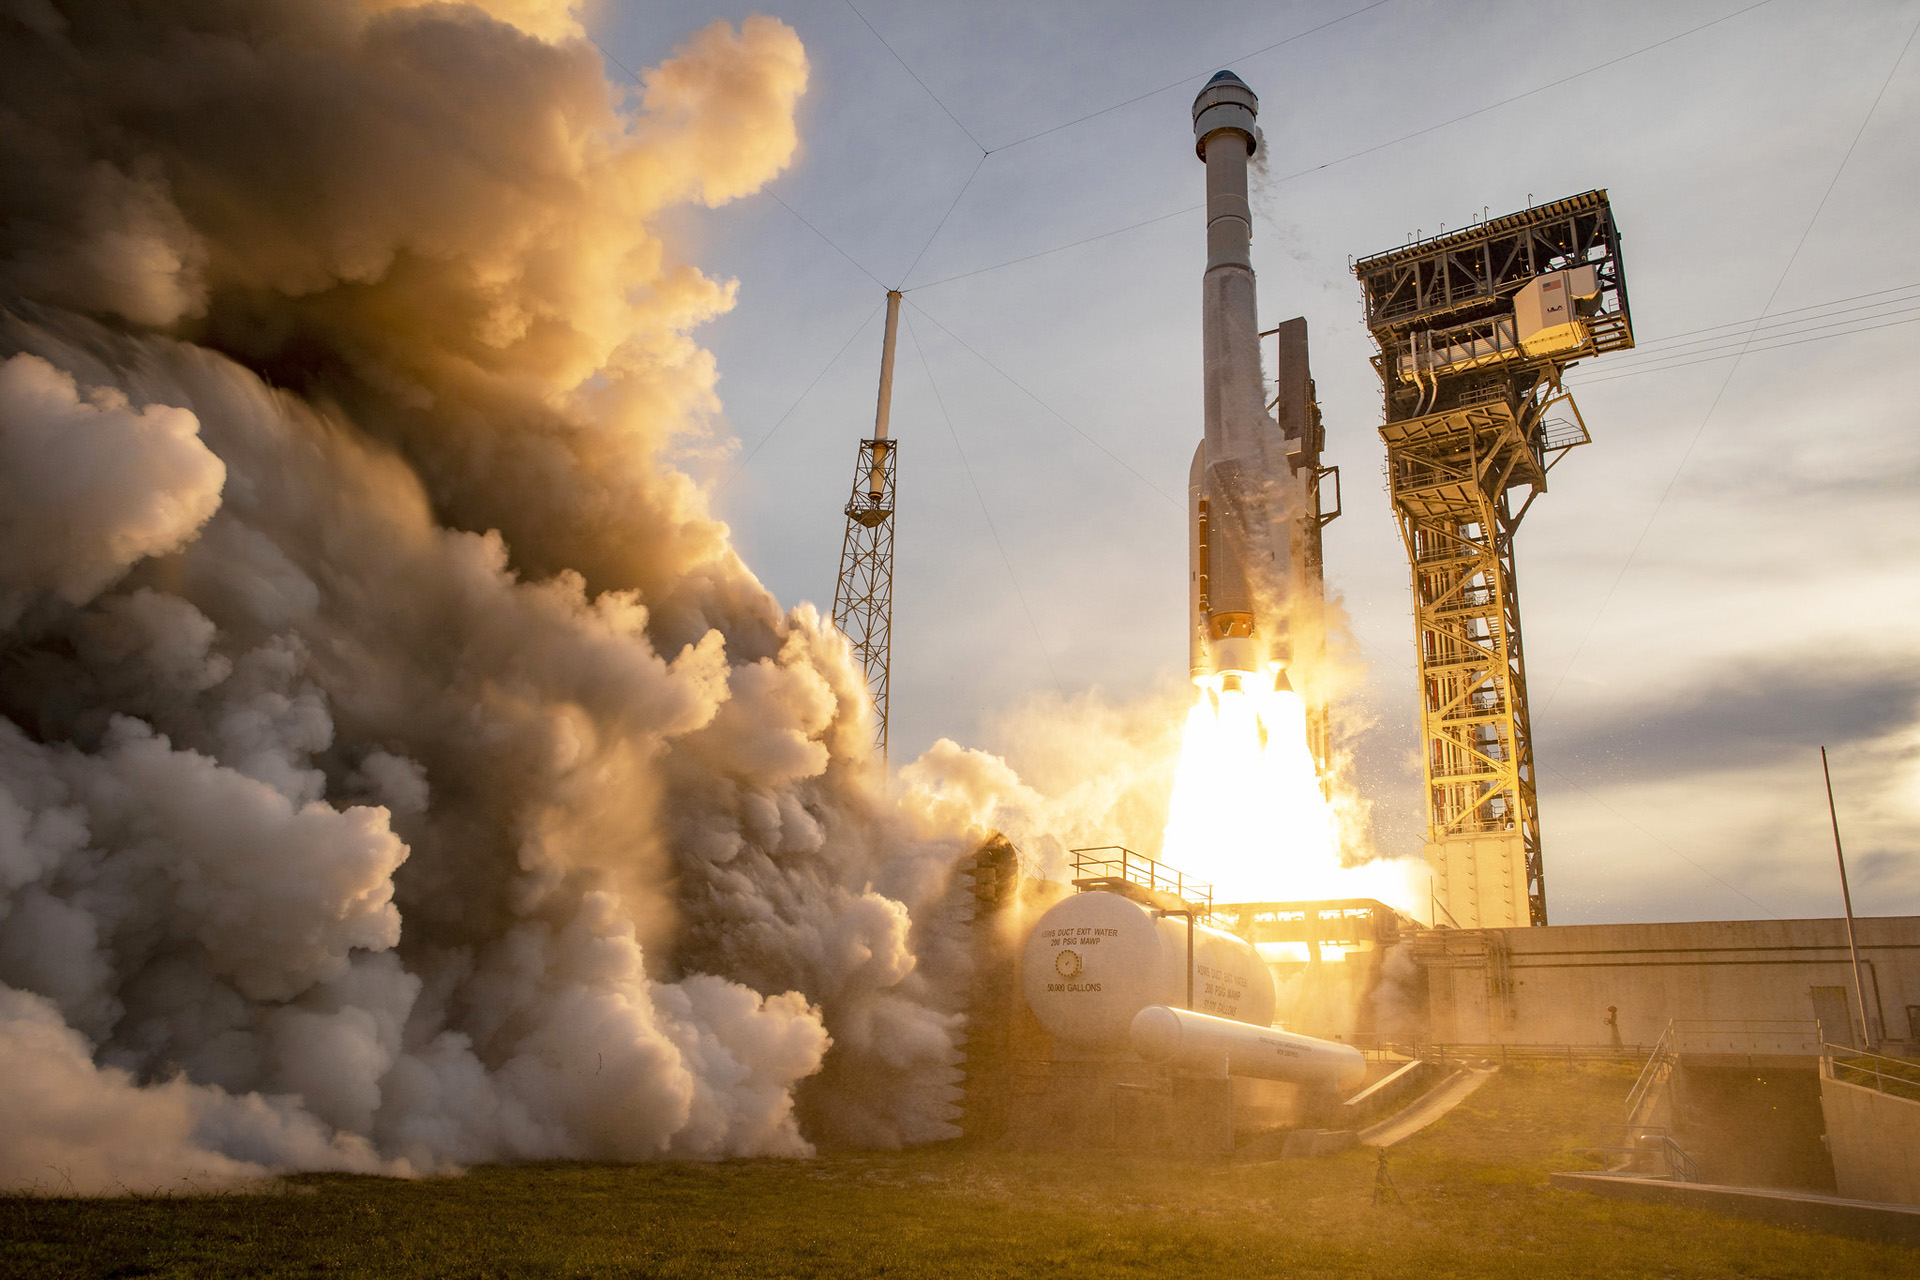 A United Launch Alliance Atlas V rocket carrying the Starliner Orbital Flight Test 2 spacecraft lifts off from Space Launch Complex 40 at Cape Canaveral Space Force Station in Florida on May 19, 2022.